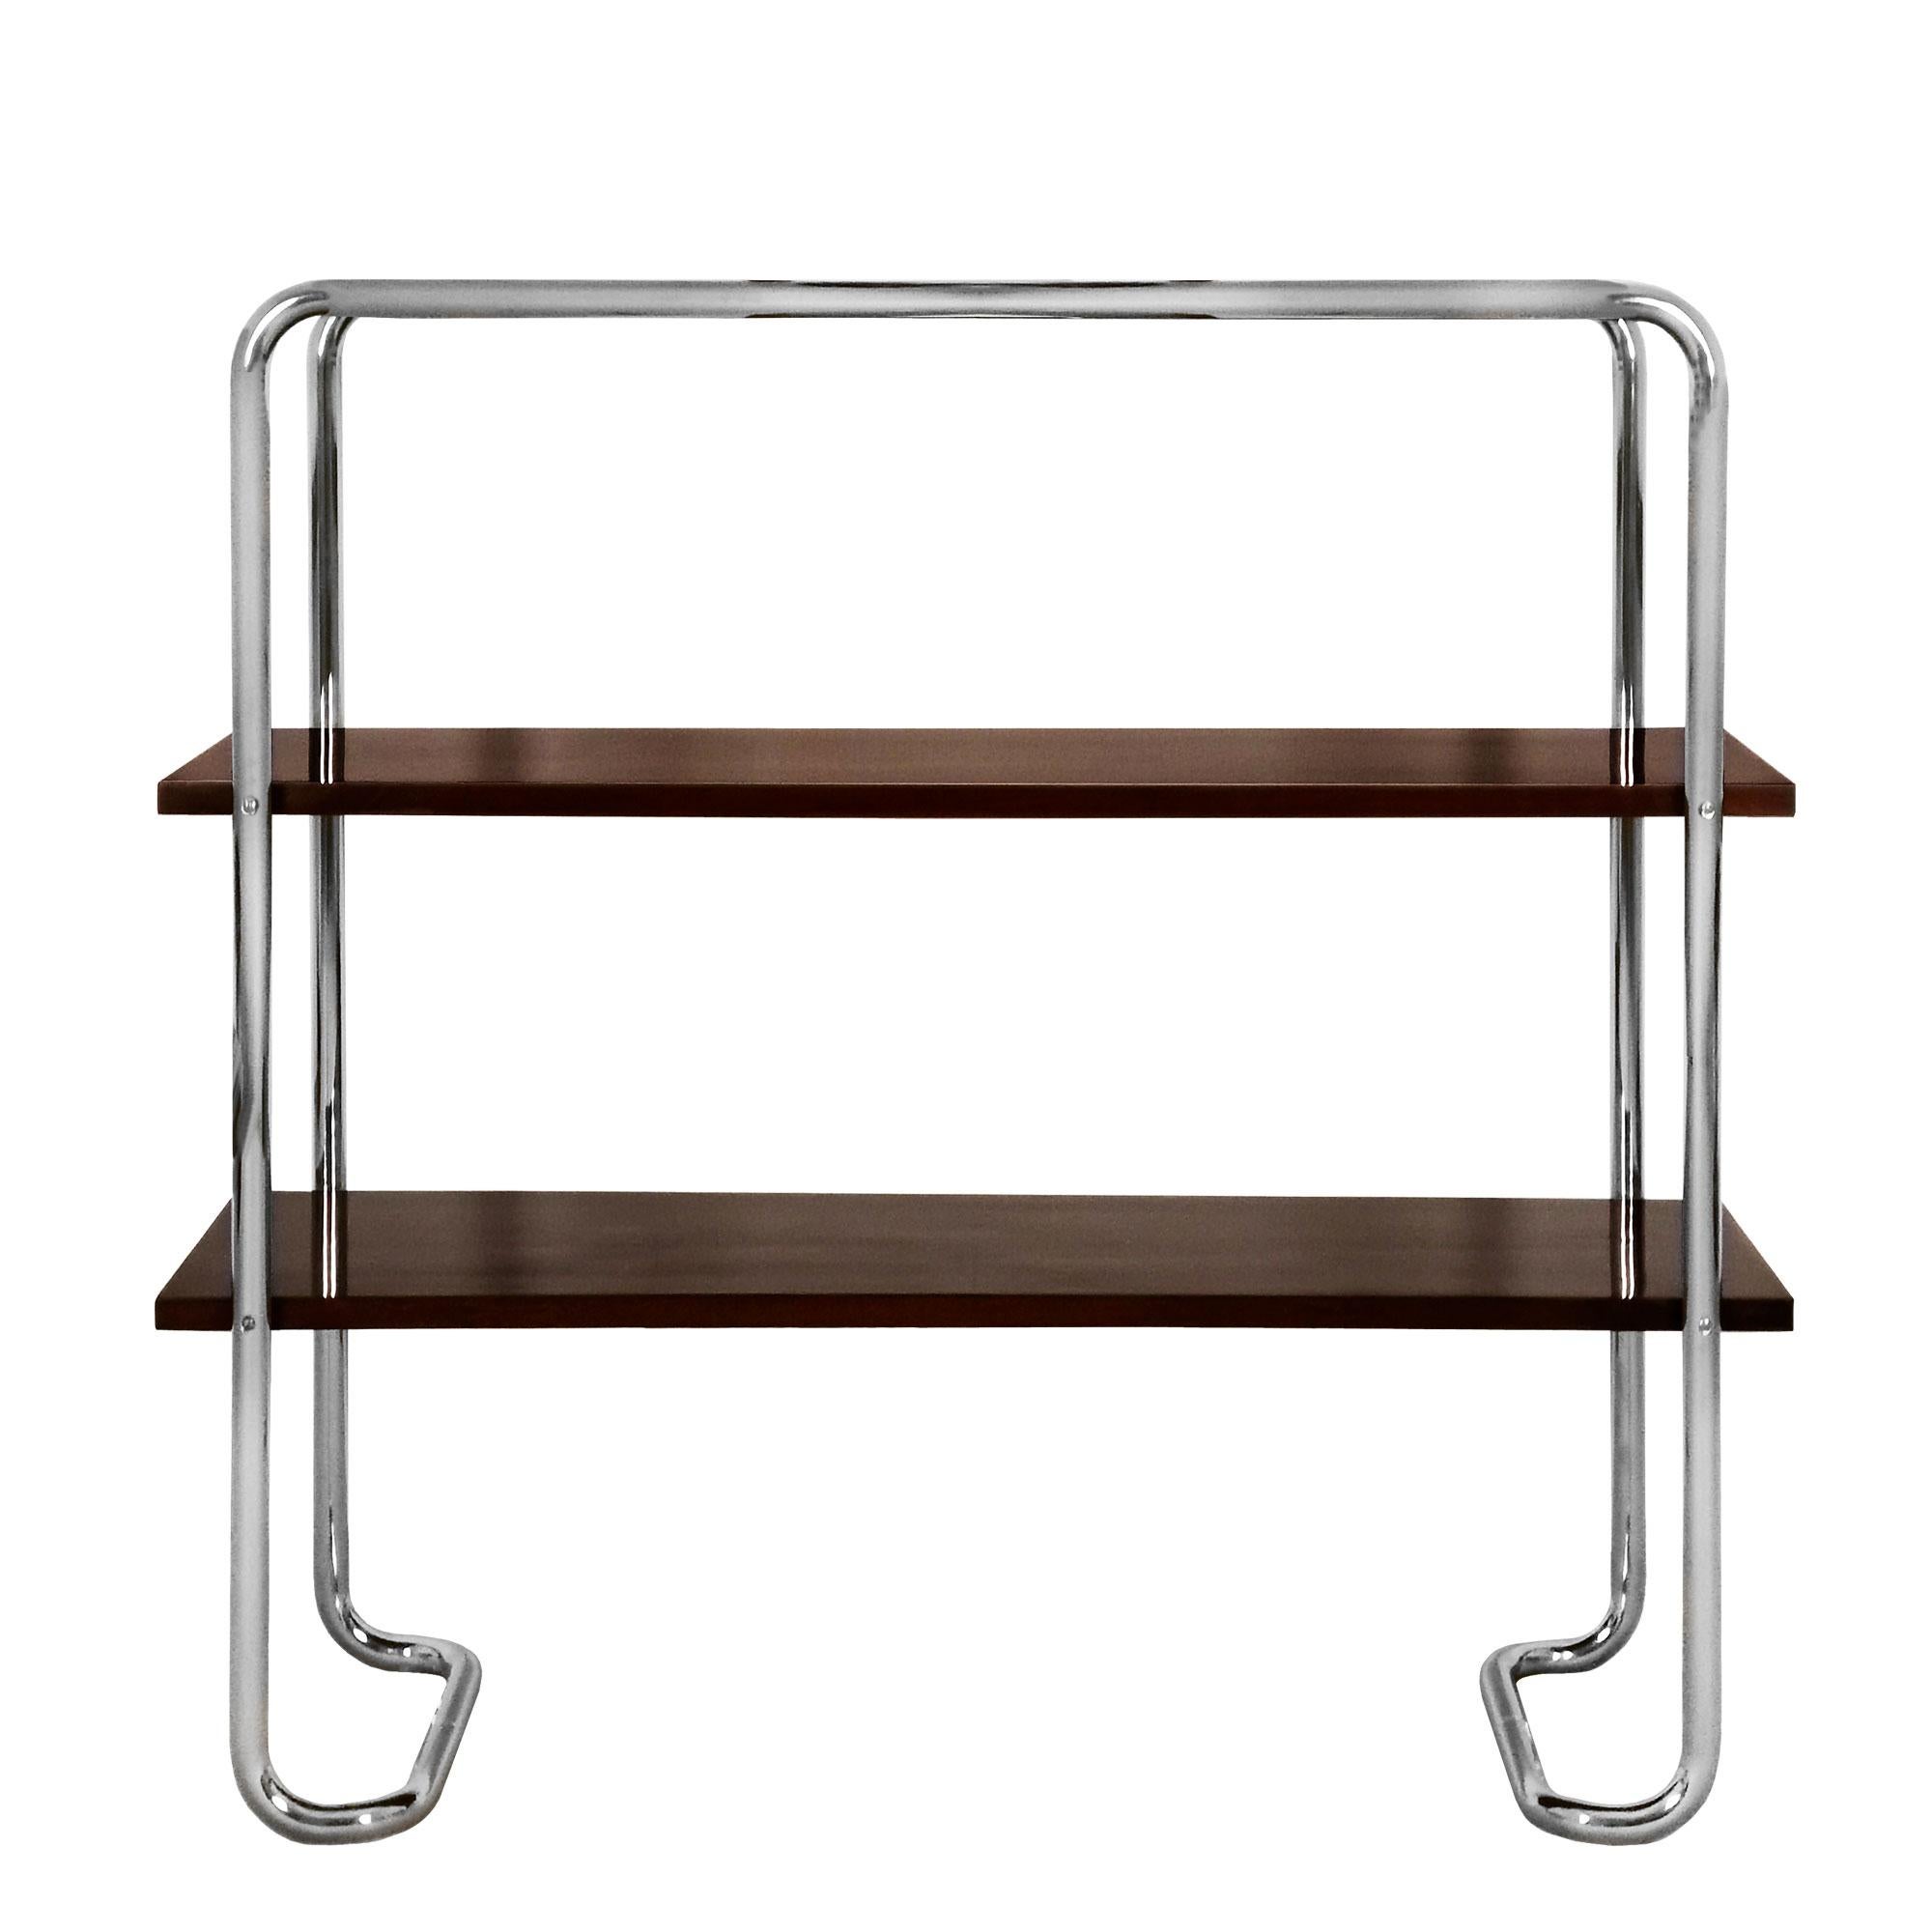 Console with a nickel plated steel tubular stands and three shelves in solid wood with walnut veneer, French polish. 

In the style of Bauhaus Movement.

Spain, Barcelona c. 1930.